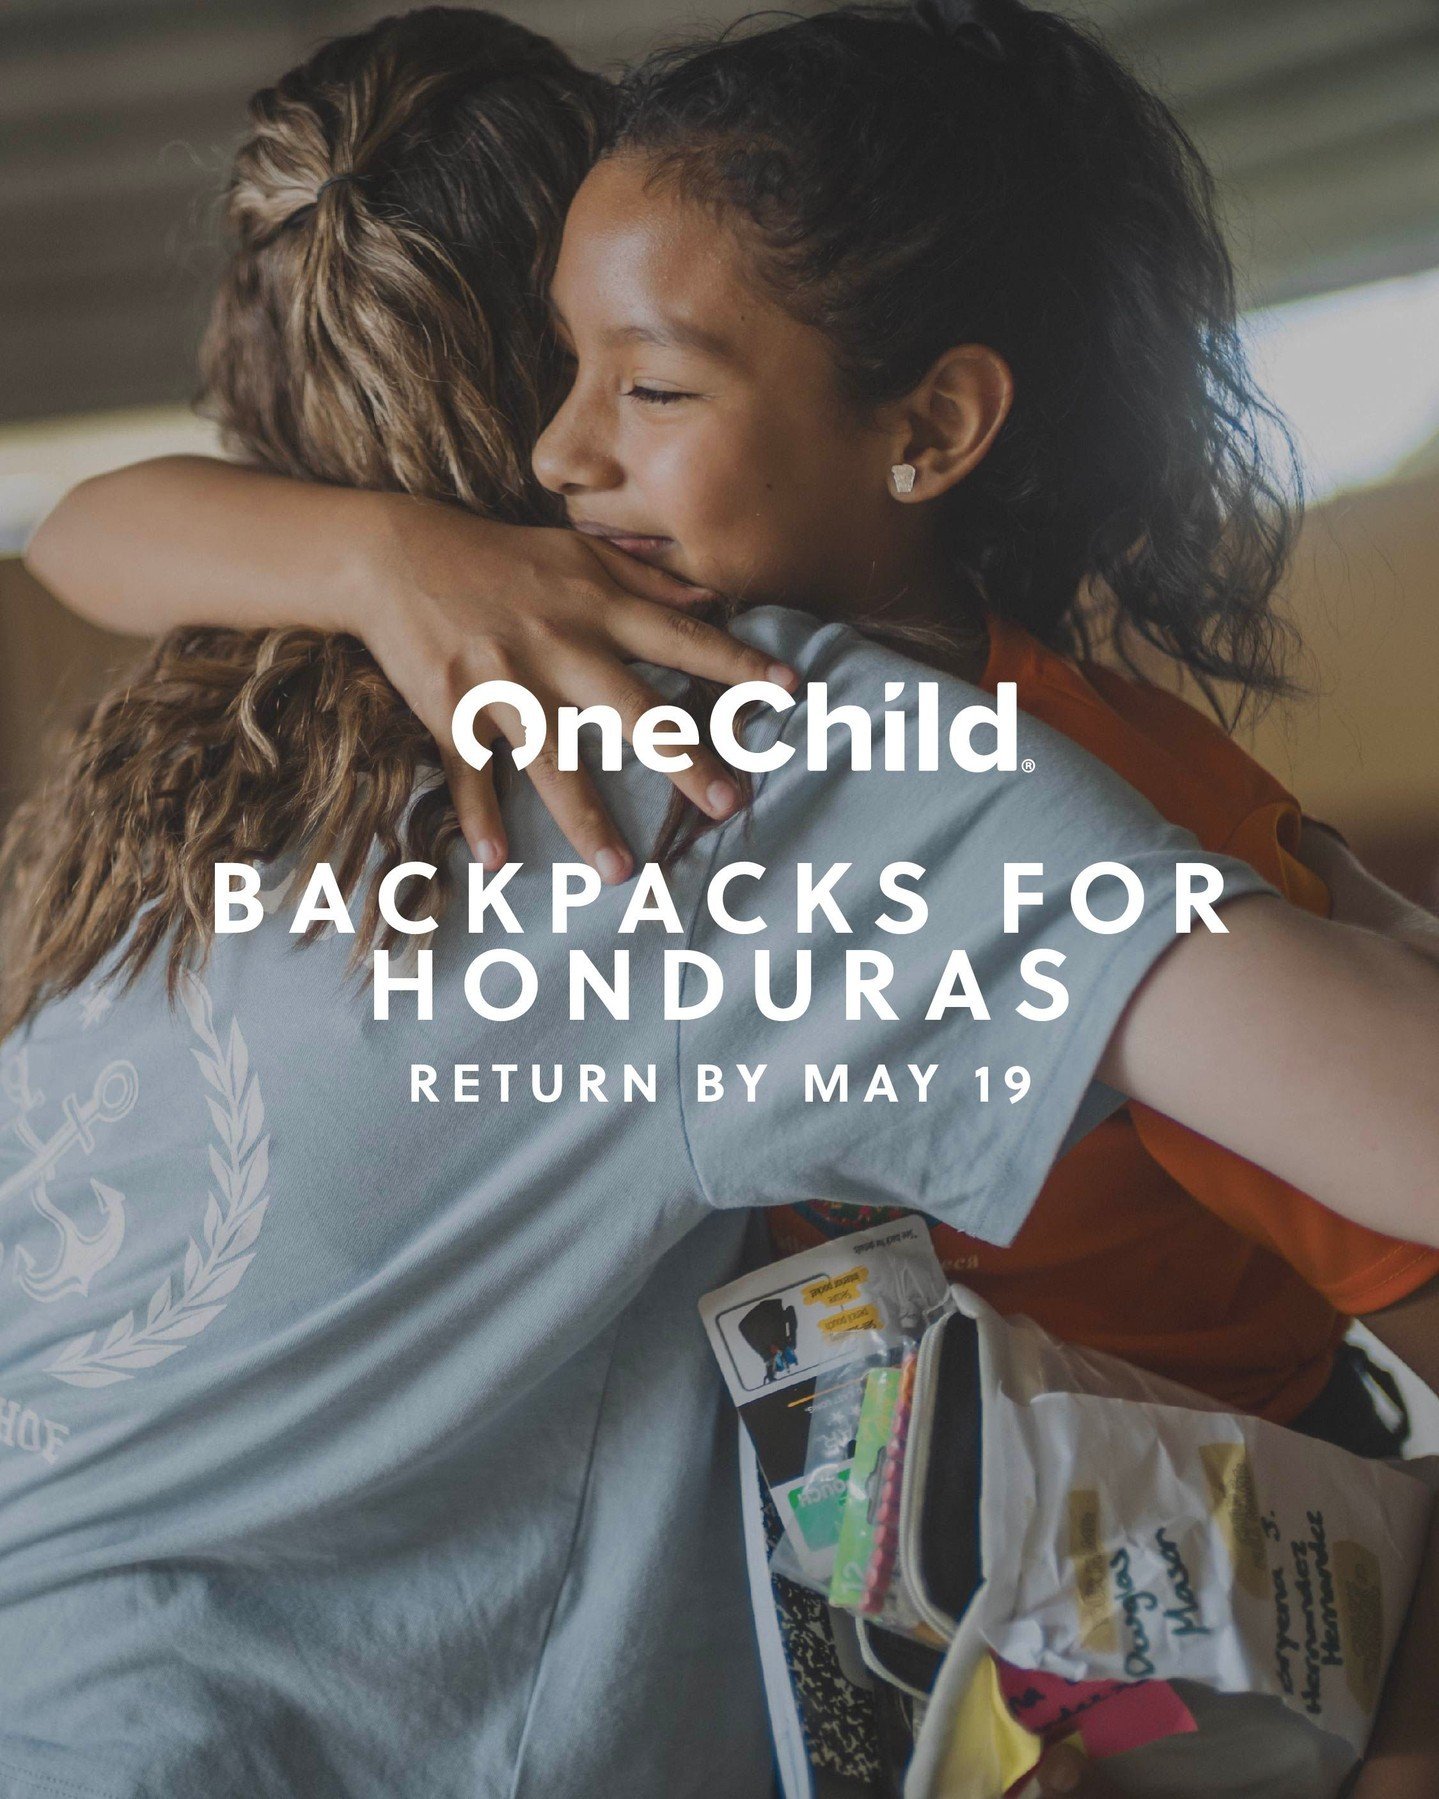 Bring those backpacks back! 🎒 #changedliveschanginglives

This summer we are partnering with our global missions partner, OneChild to help bring backpacks to children in Honduras. Thanks to your irrational generosity, 200 children will receive a bac